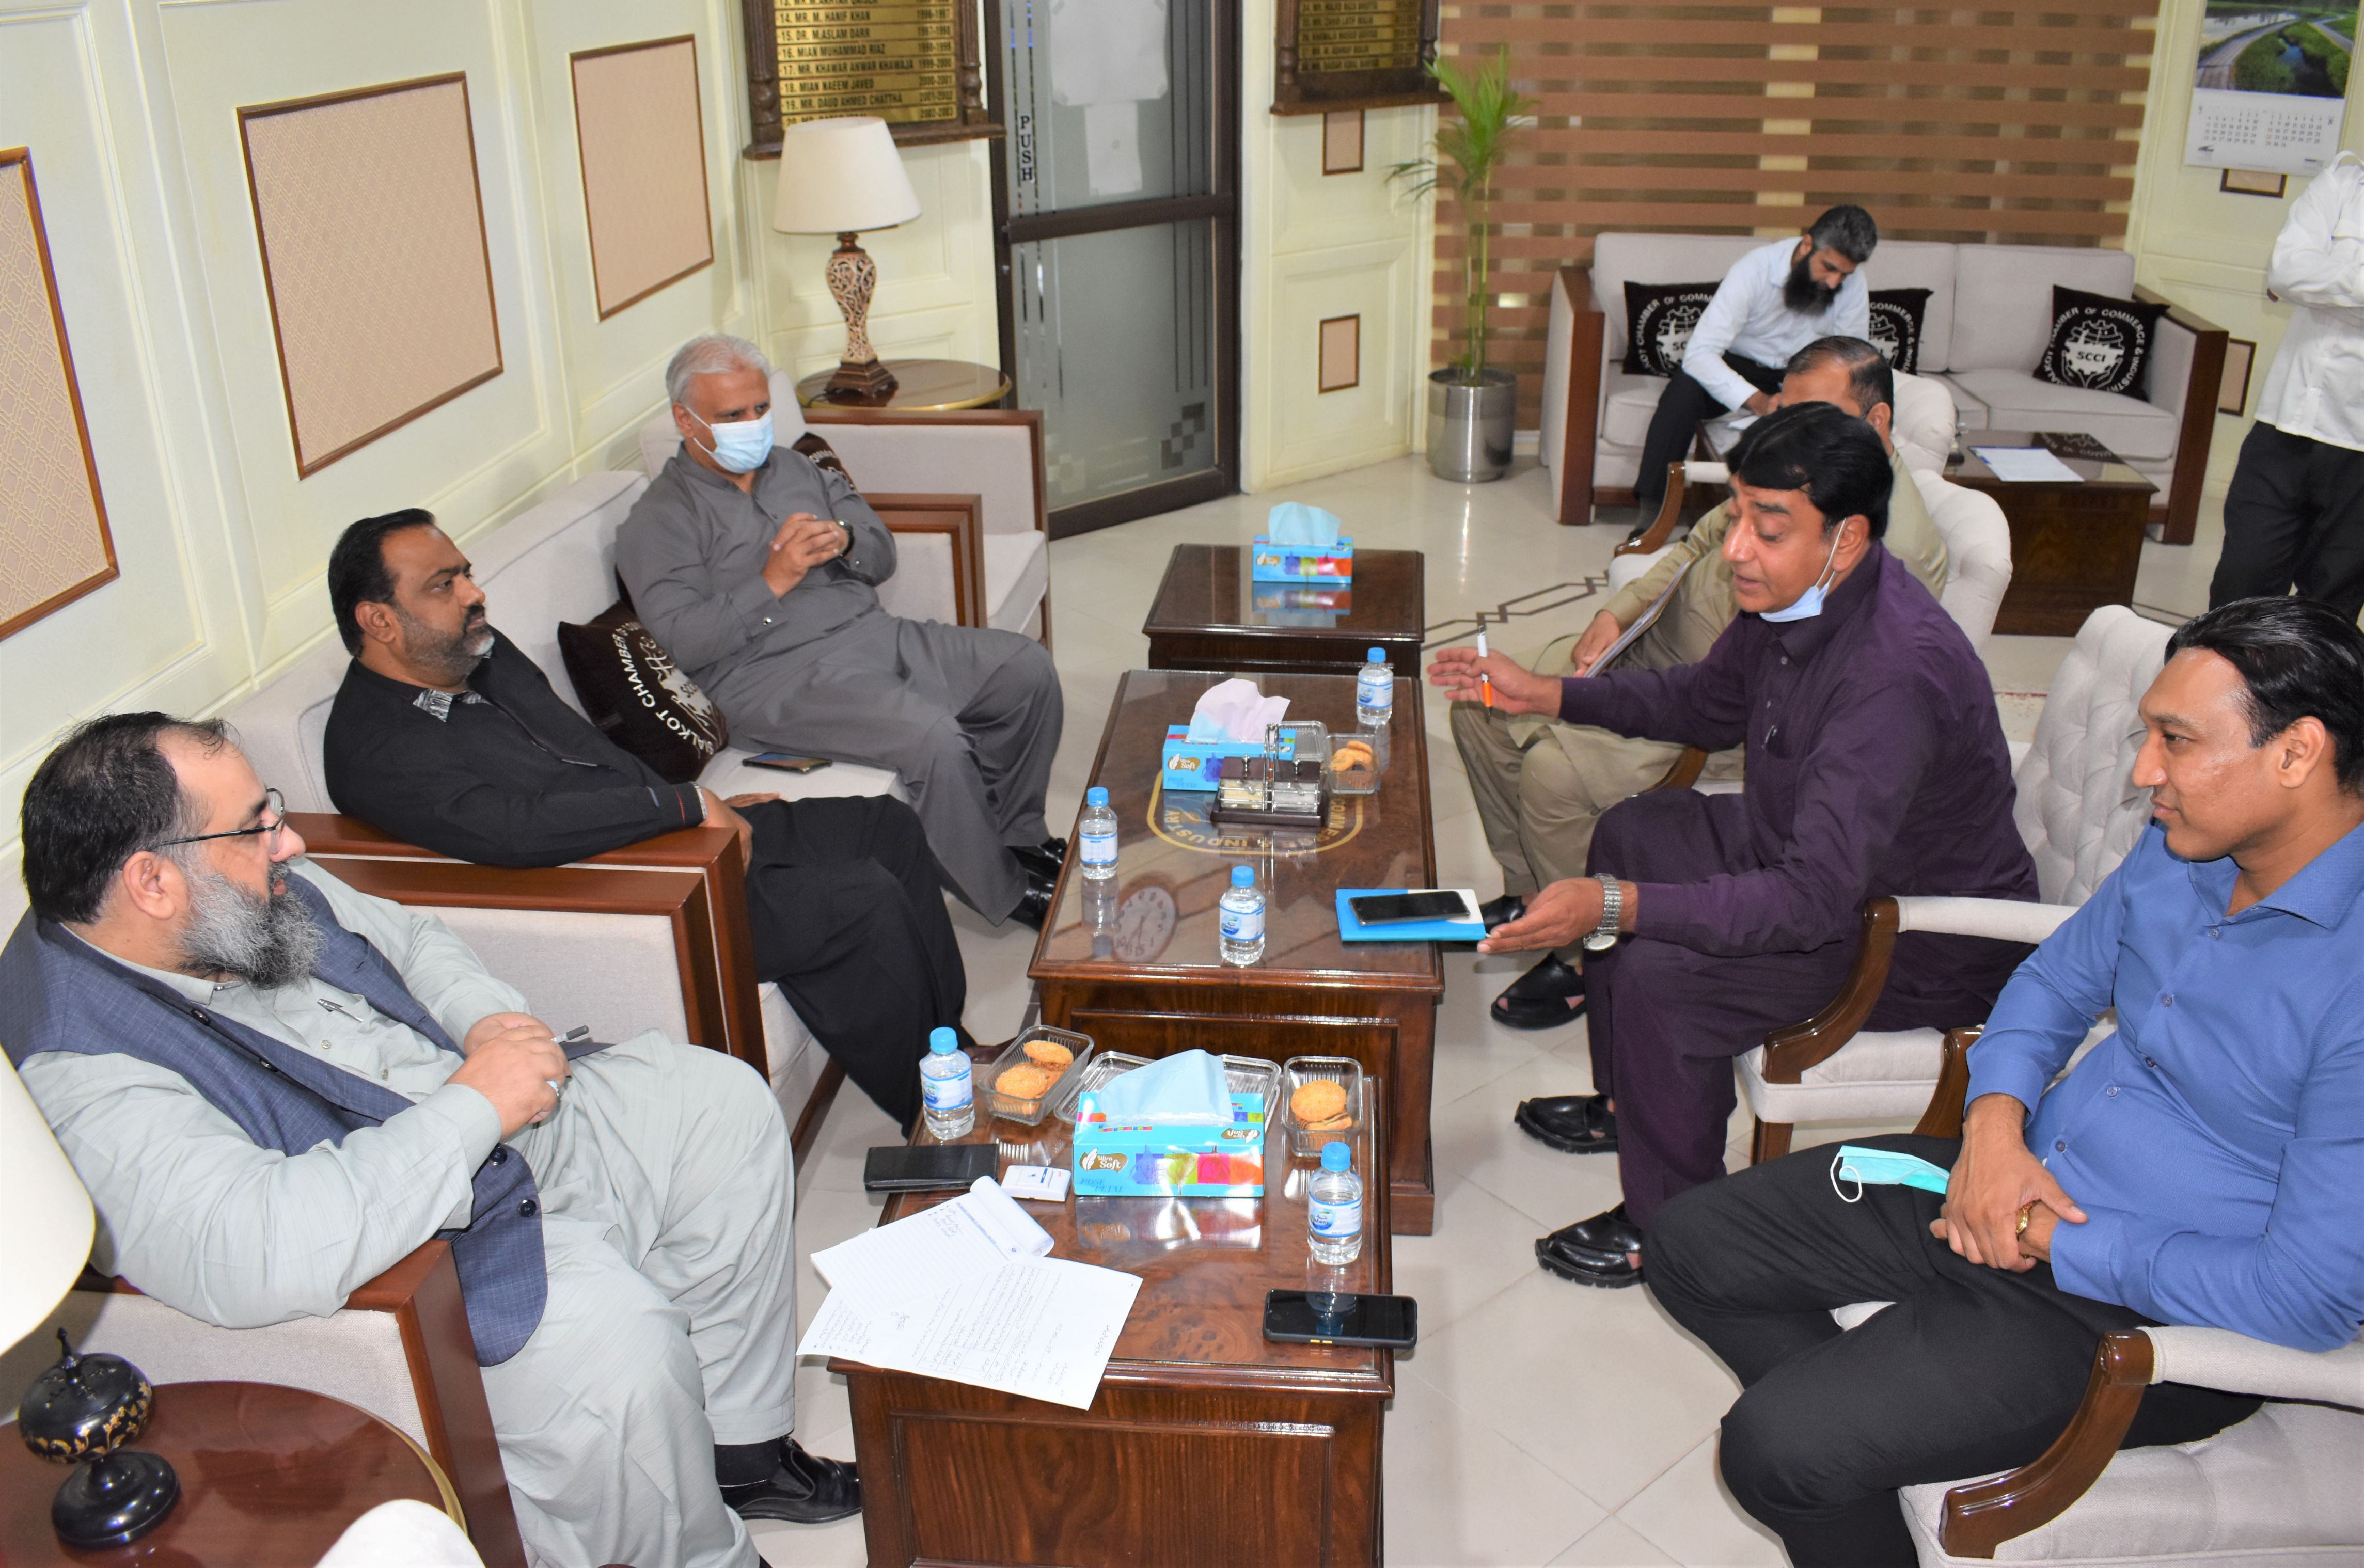 On August 03, 2021, Mr. Khuram Aslam, Senior Vice President and Mr. Ansar Aziz Puri, Vice President, Sialkot Chamber of Commerce & Industry had a meeting with Mr. Rana Saqlain Mehmood, Municipal Officer (Finance) and Mr. Aijaz Malik, Municipal Officer (Regulations) to discuss issues relating to Municipal Corporation Sialkot.